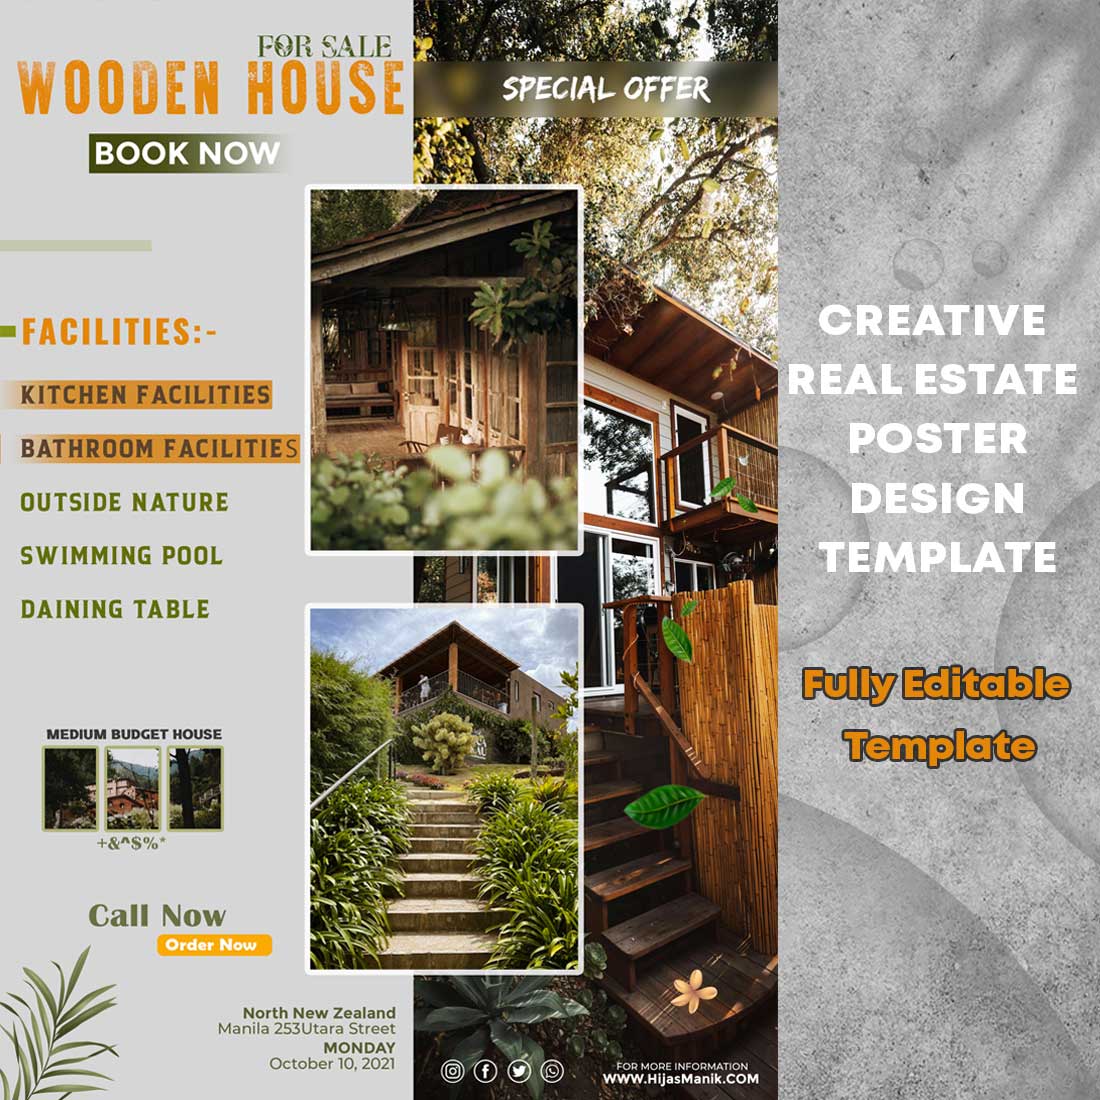 Wooden House Sale In Real estate Fully Editable Template preview image.